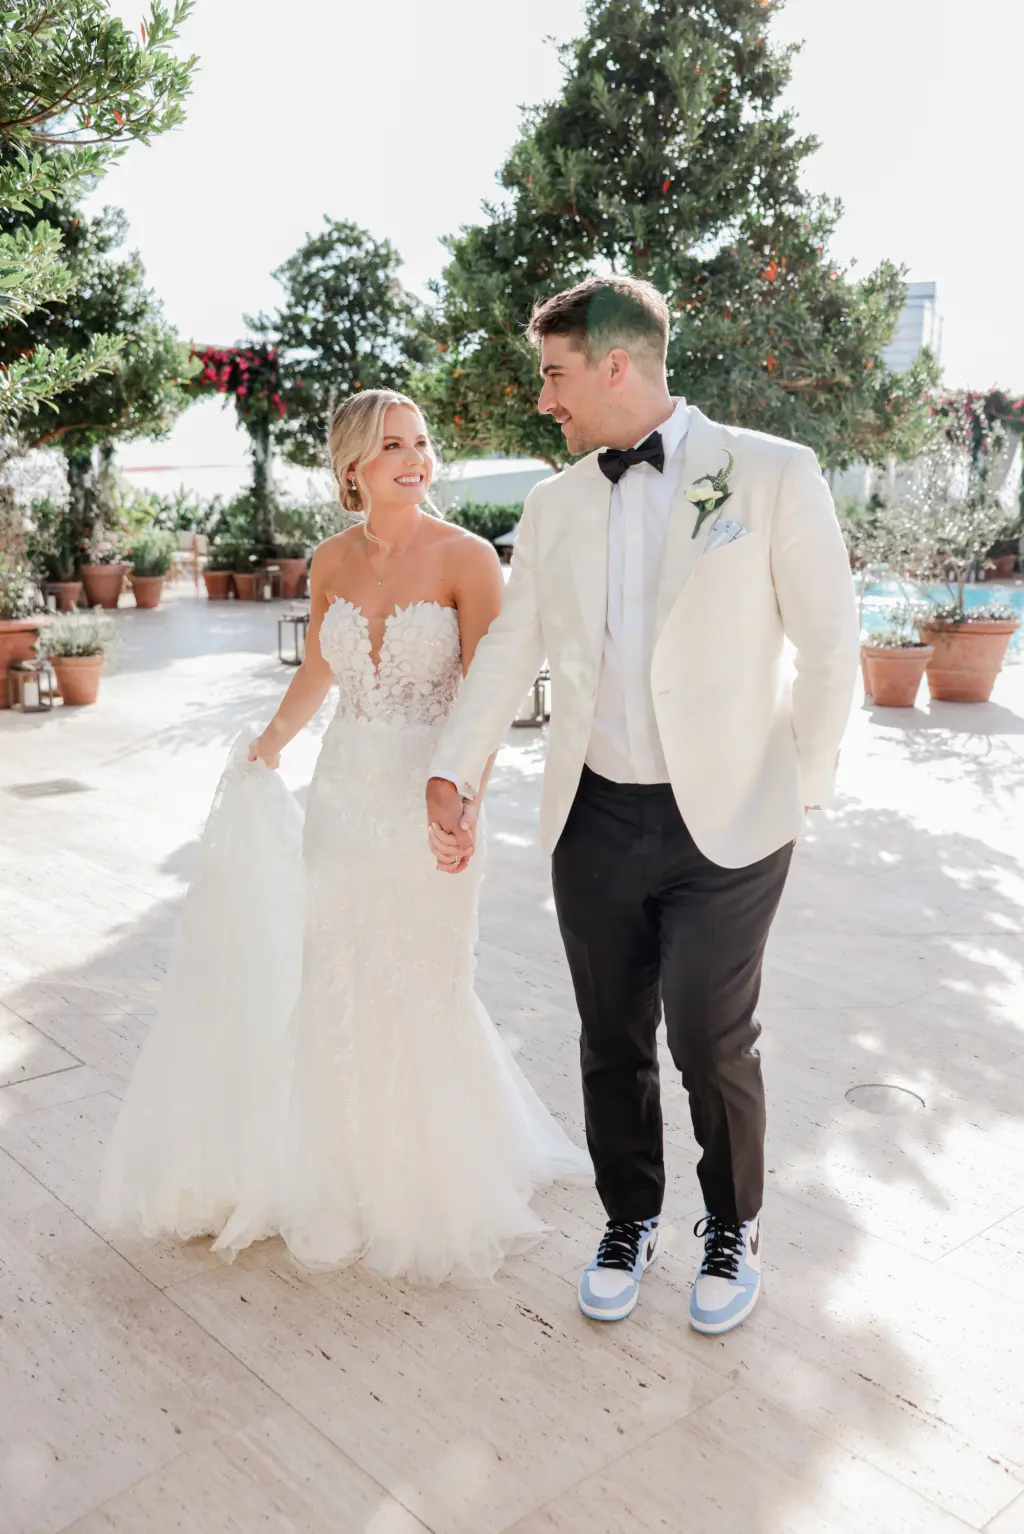 Bride and Groom First Look Wedding Portrait | Black and White Tuxedo with Light Blue Nike Dunk Retro Shoe | Strapless White Floral Applique Pronovias Mermaid Wedding Dress Inspiration | Tampa Bay Photographer Lifelong Photography